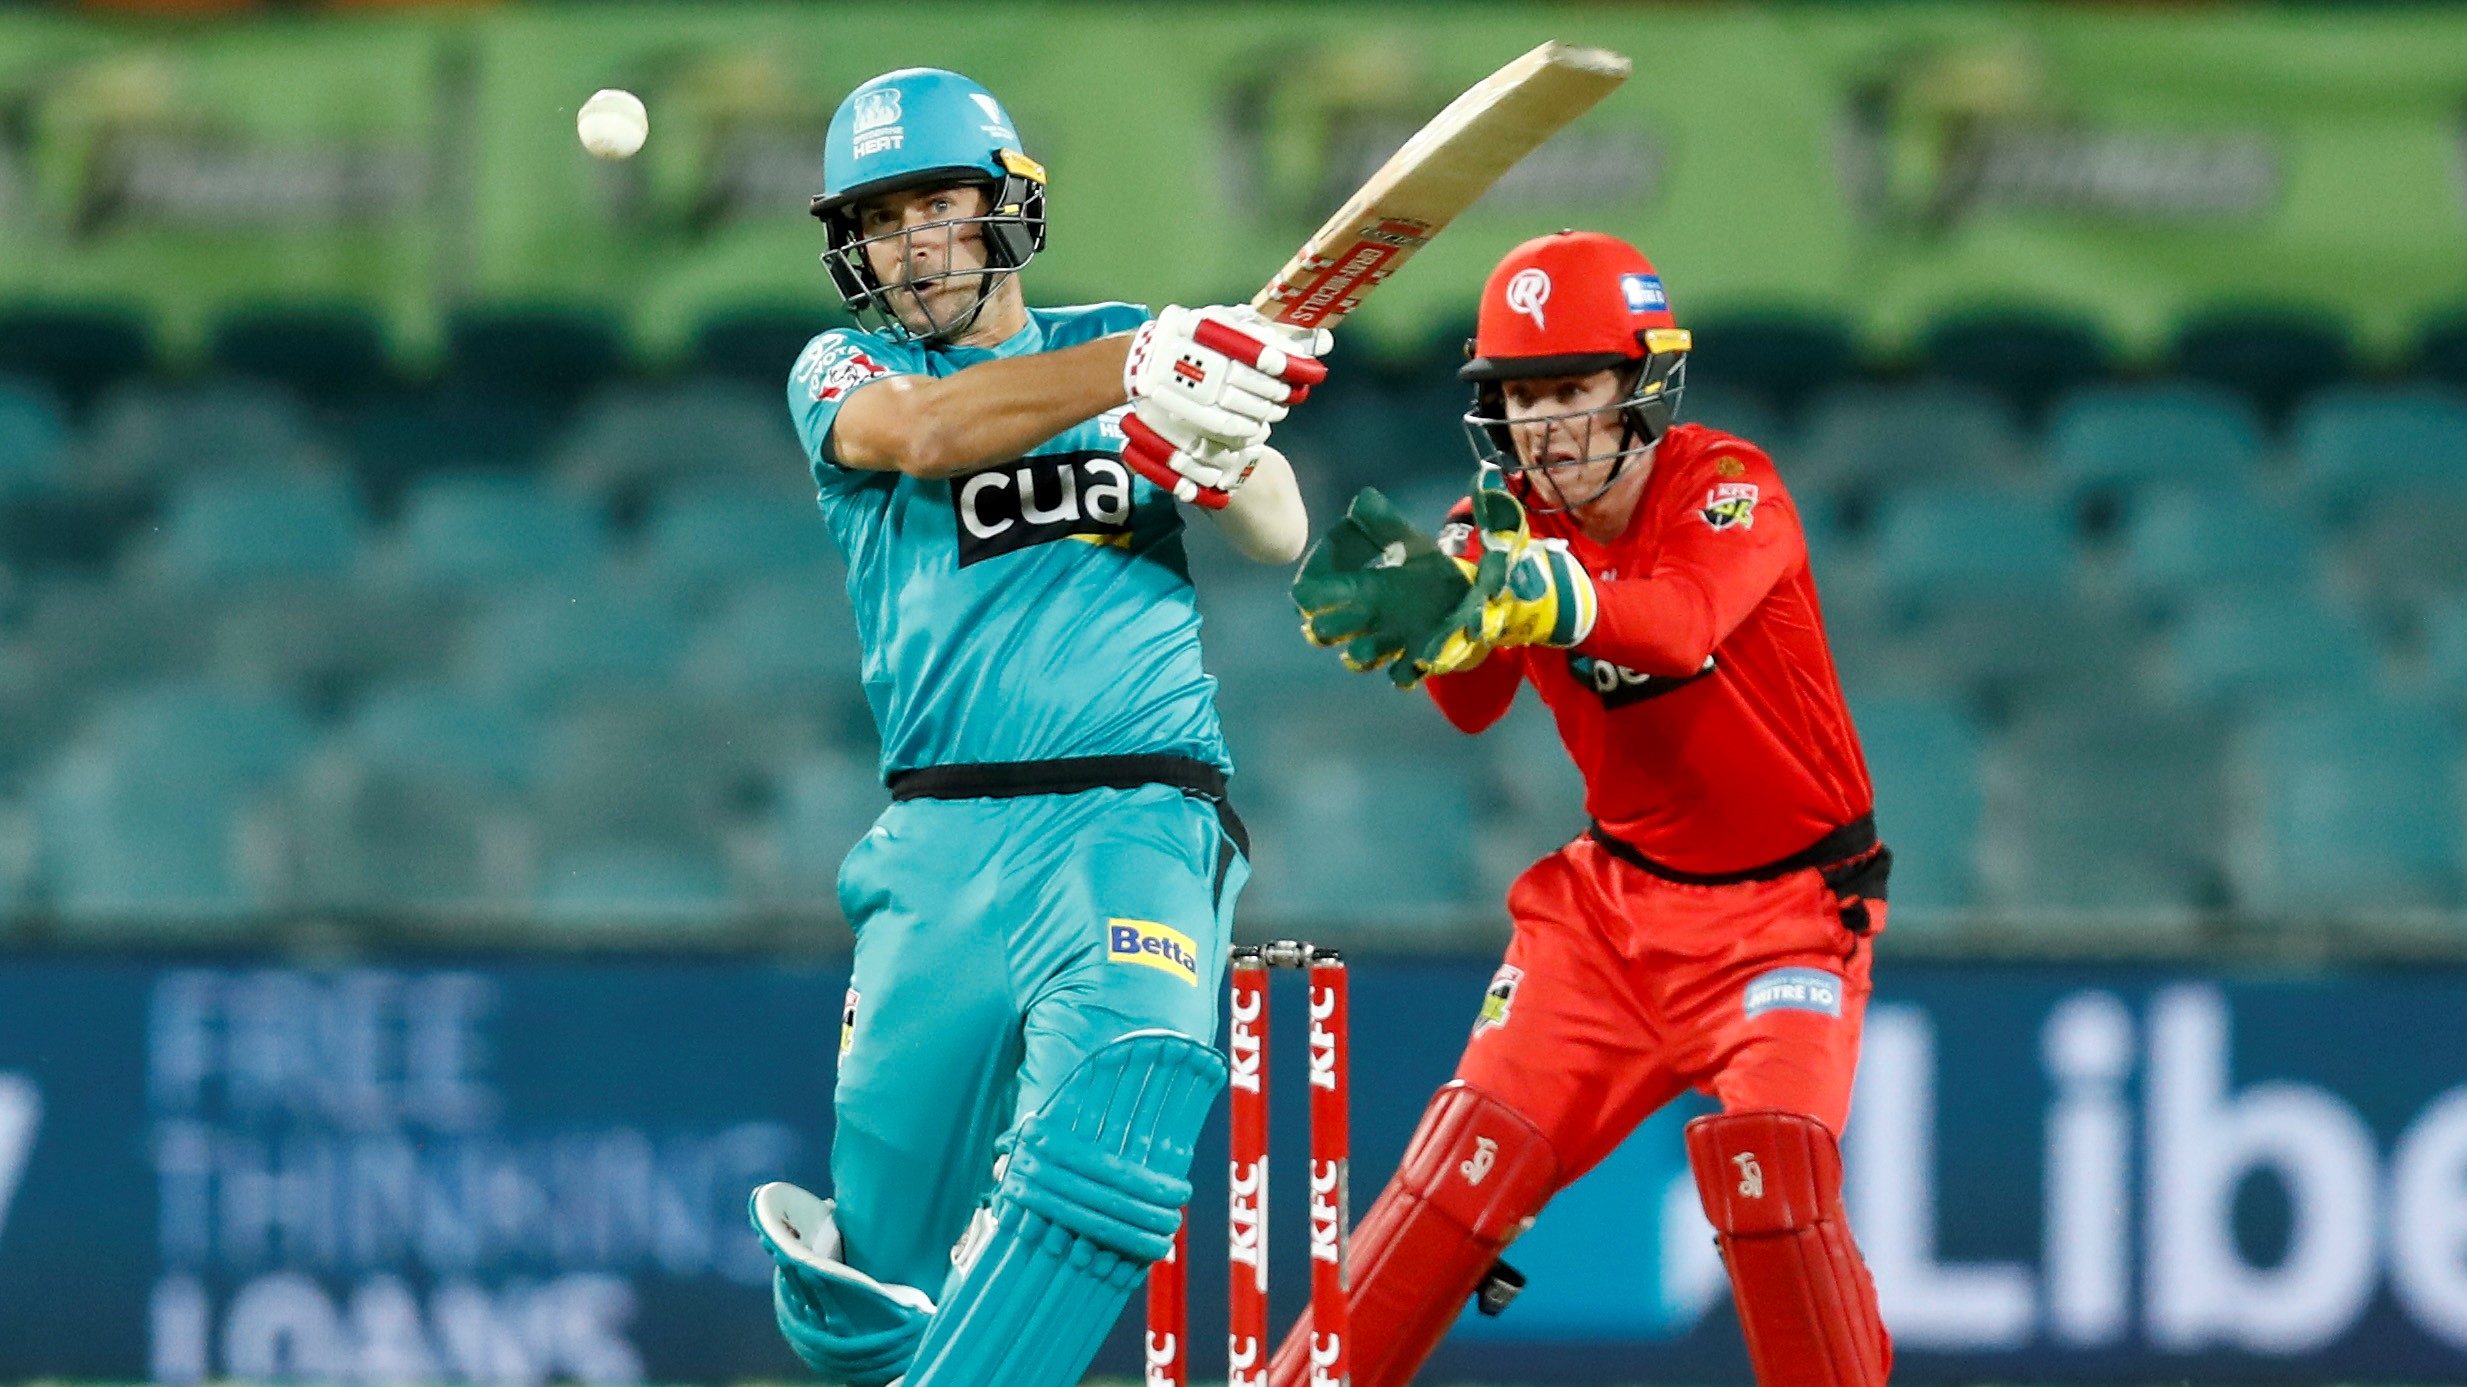 BBL10 | Match Report: Joe Burns take Heat to victory as Renegades run out of luck